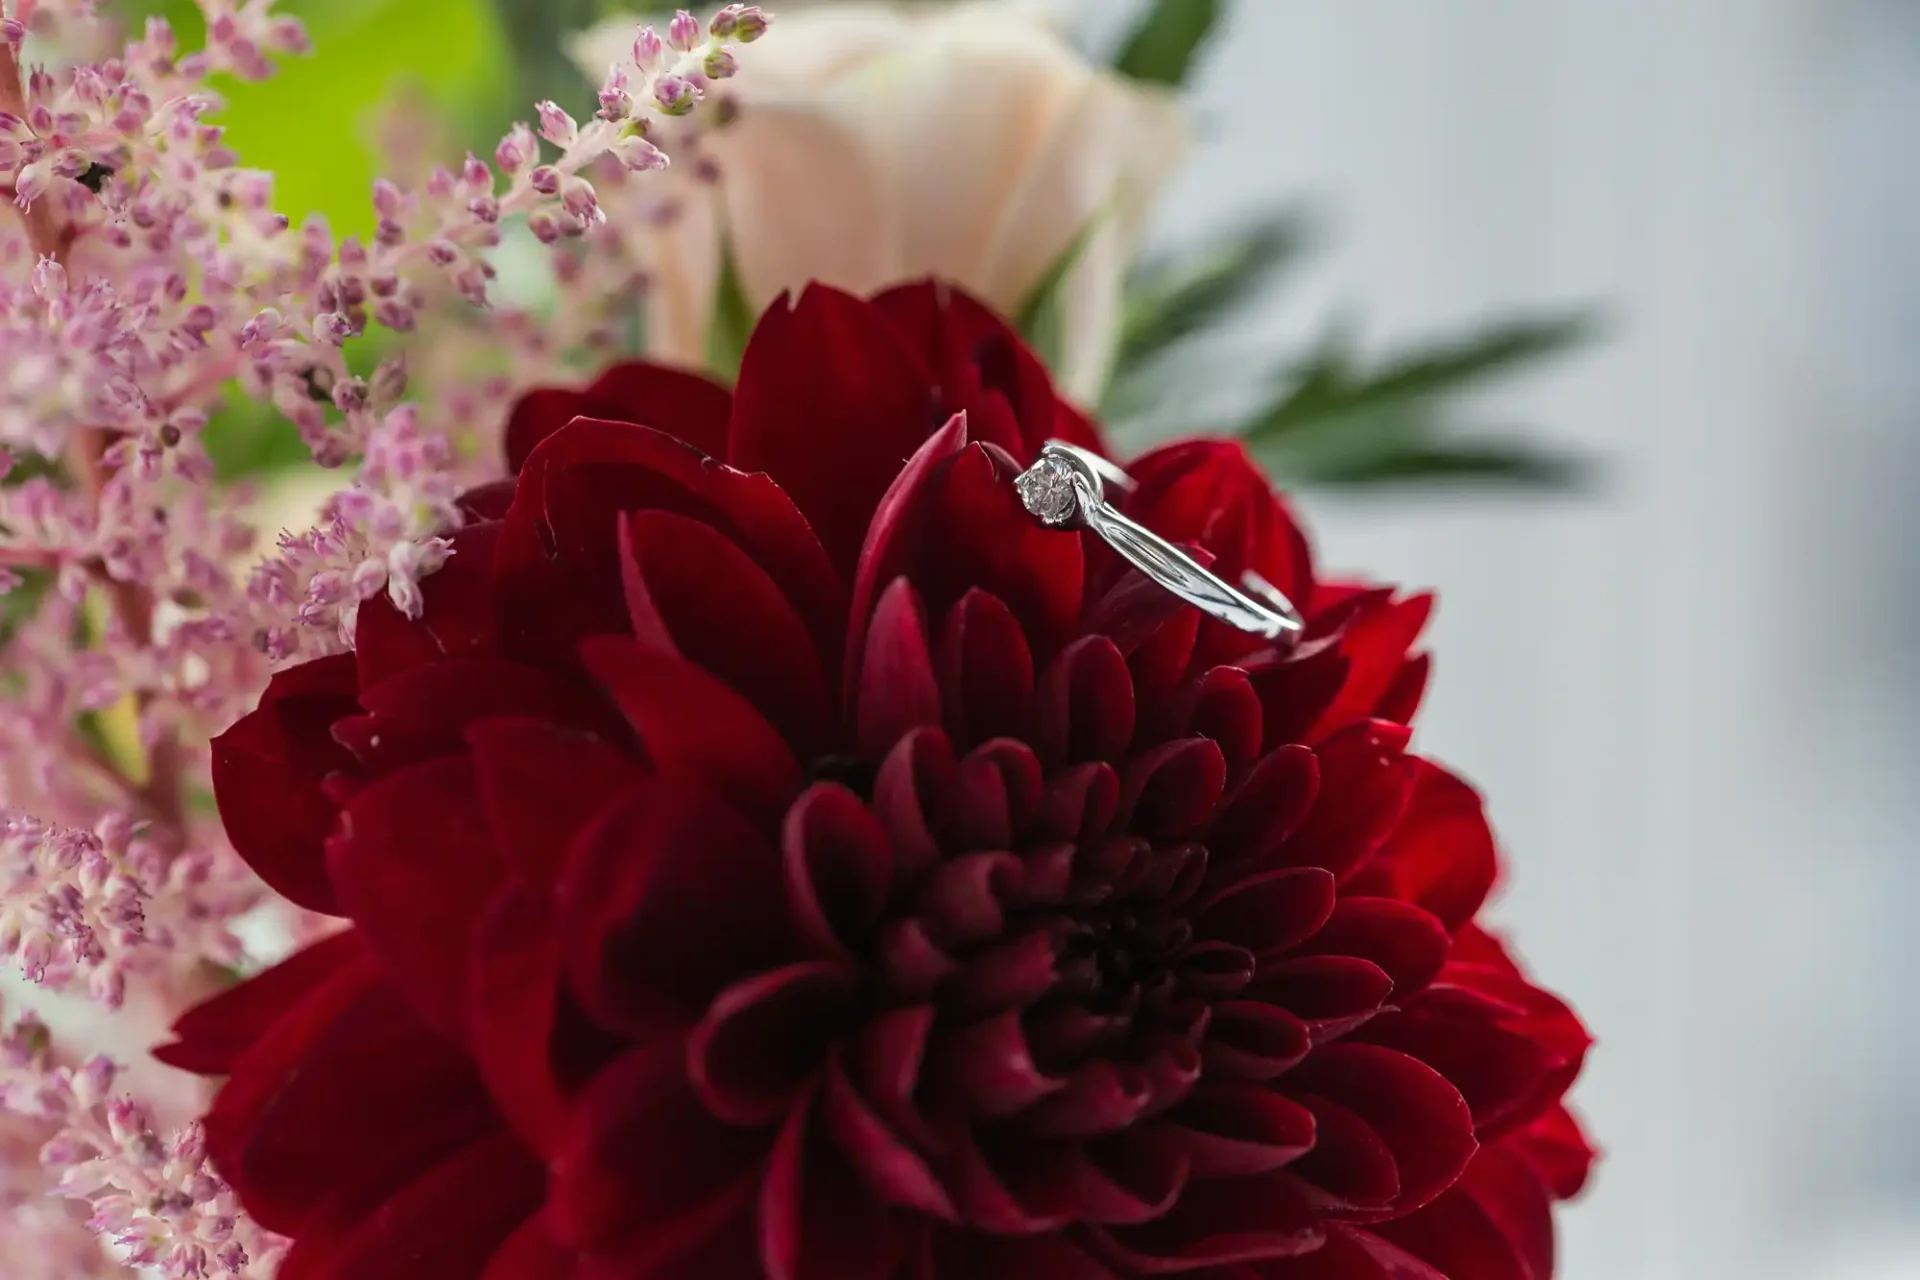 Engagement ring placed on a red dahlia with soft pink and white flowers in the background.